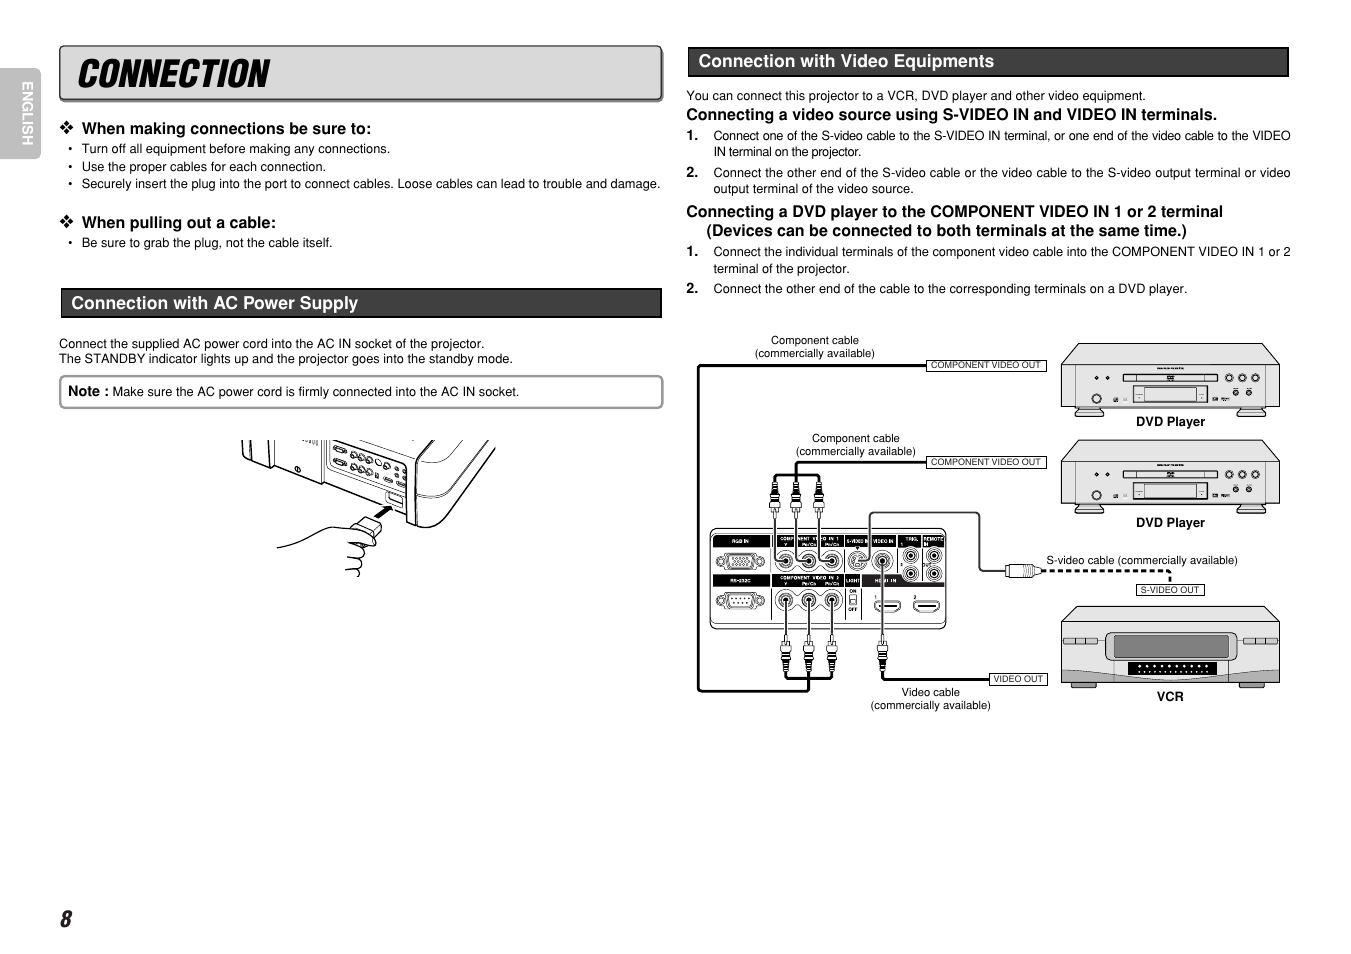 Connection, Fl off standby fl off standby | Marantz VP-12S4 User Manual | Page 14 / 37